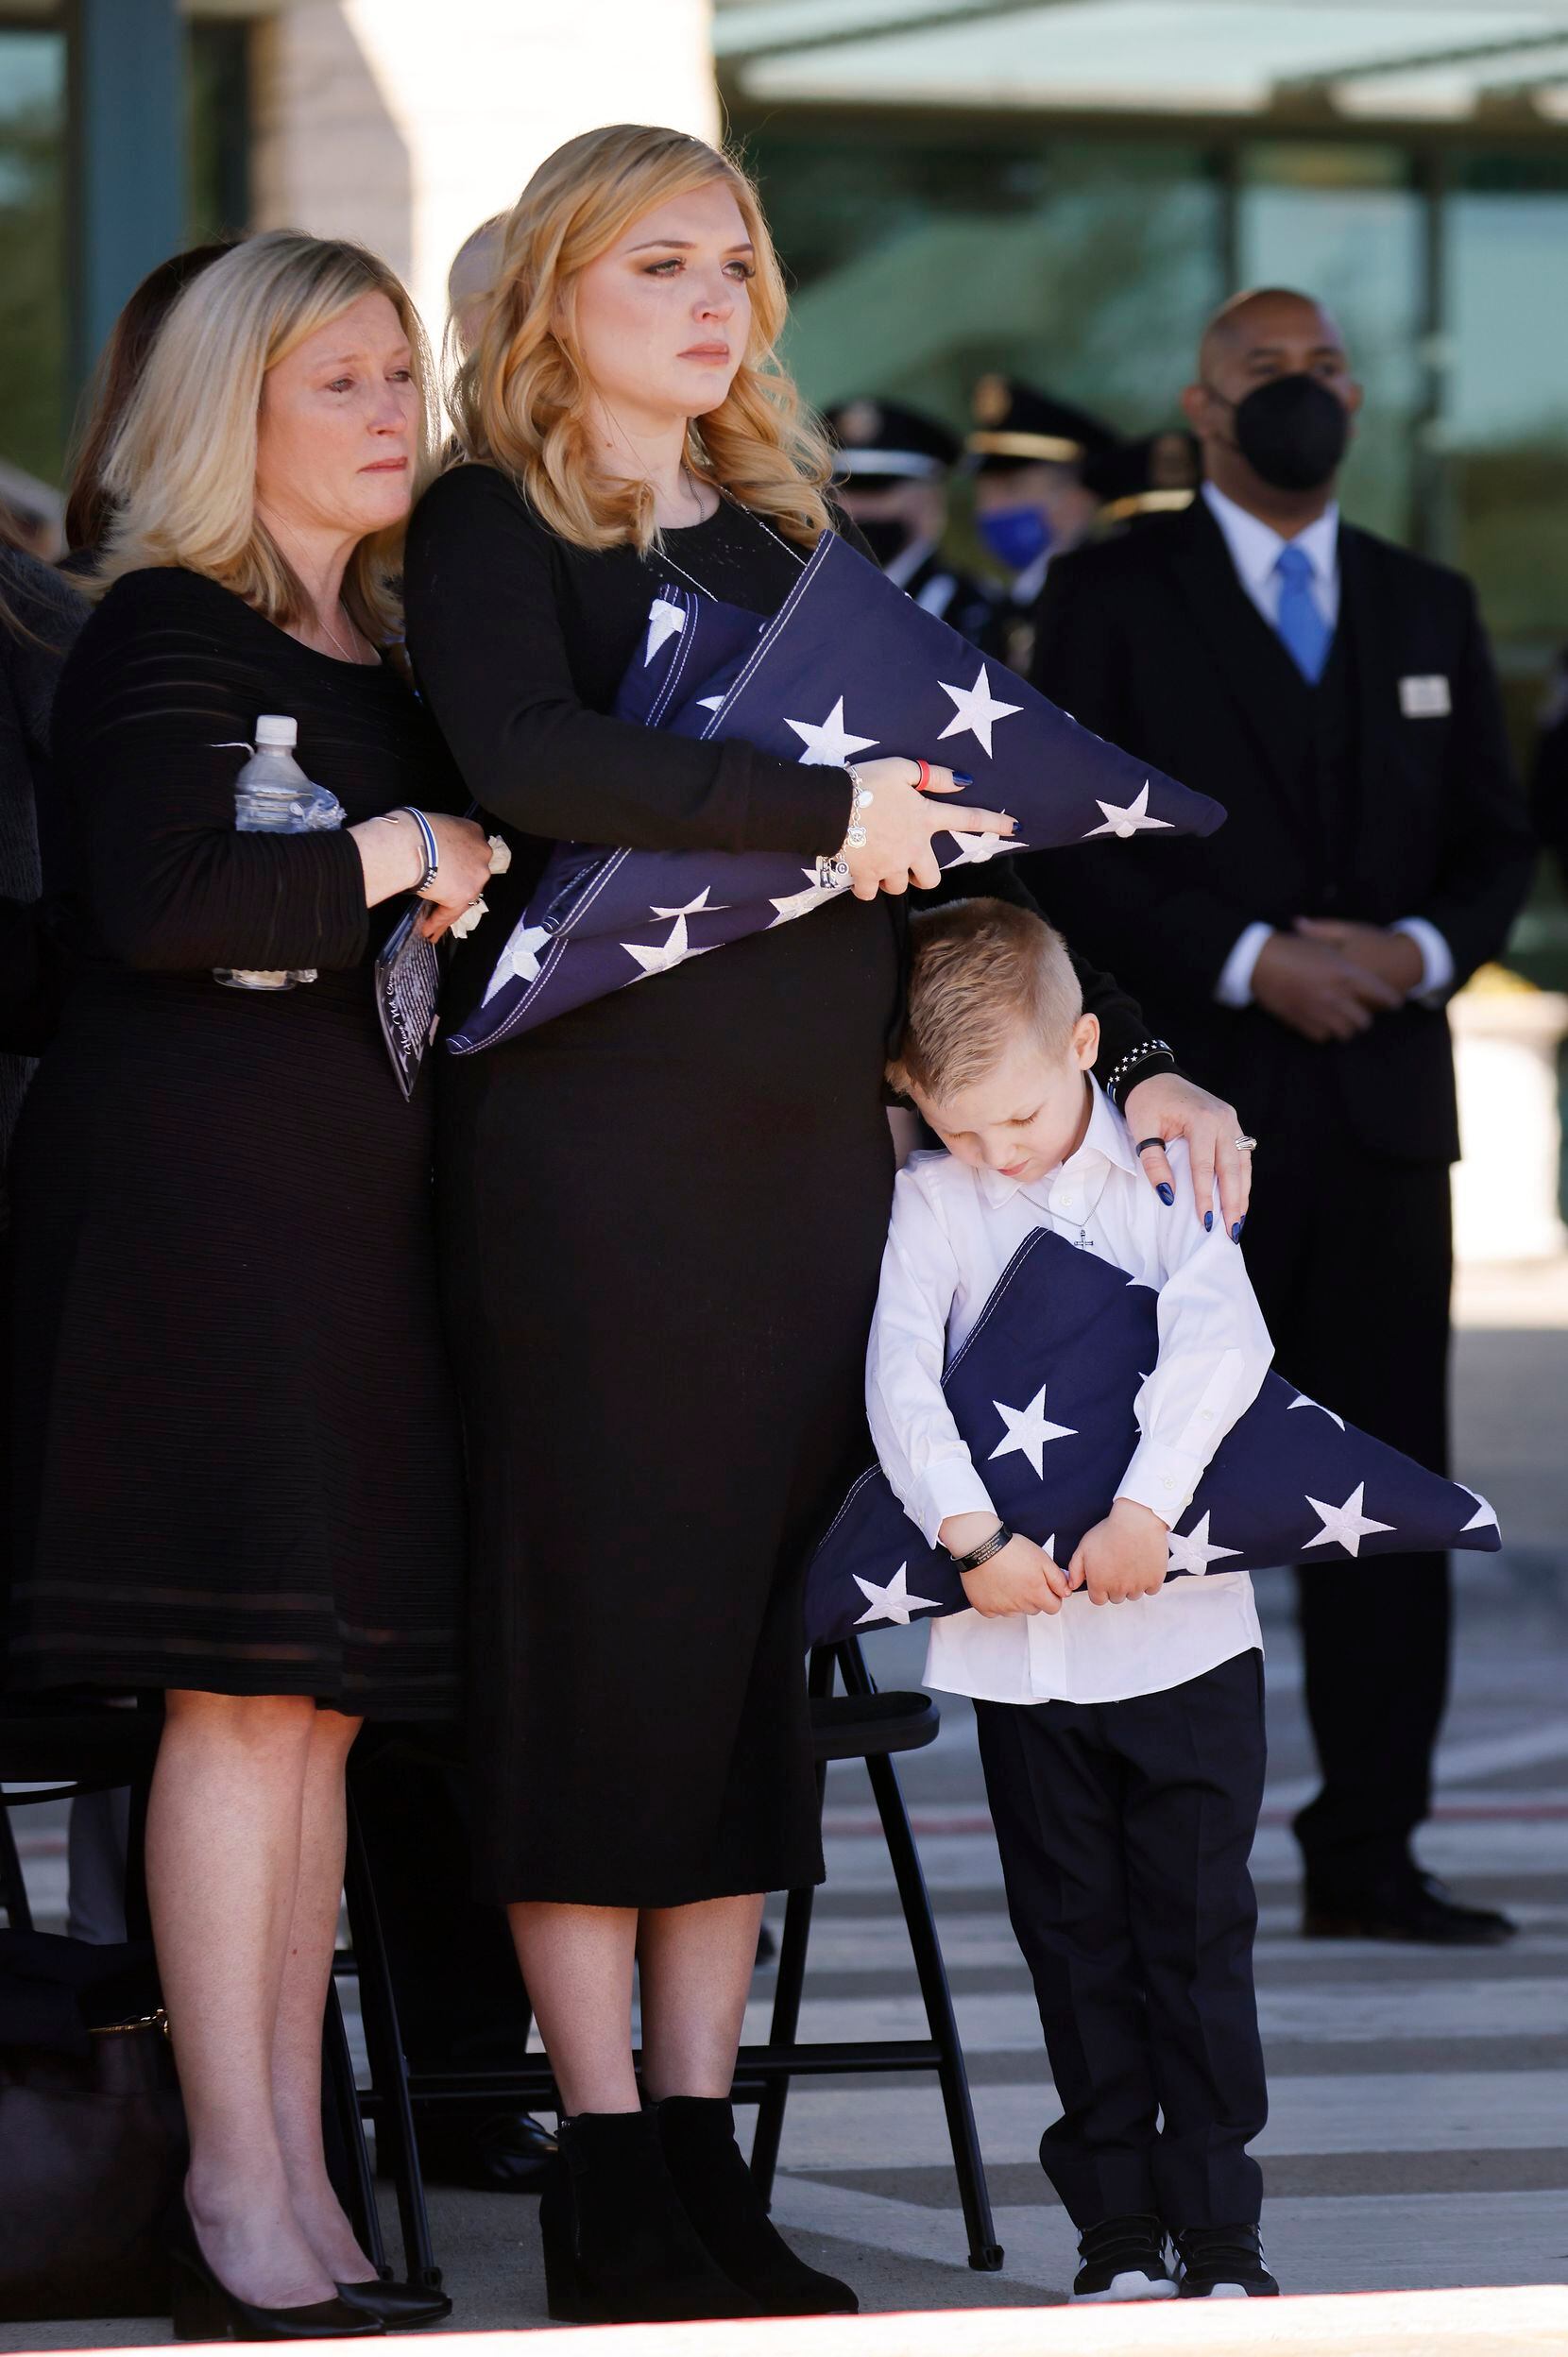 Penton’s widow, Noel Bergenske Penton (center), and son, Cashton, gripped folded U.S. flags given to them by Dallas police Chief Eddie Garcia after the funeral service  Feb. 22 at Prestonwood Baptist Church.